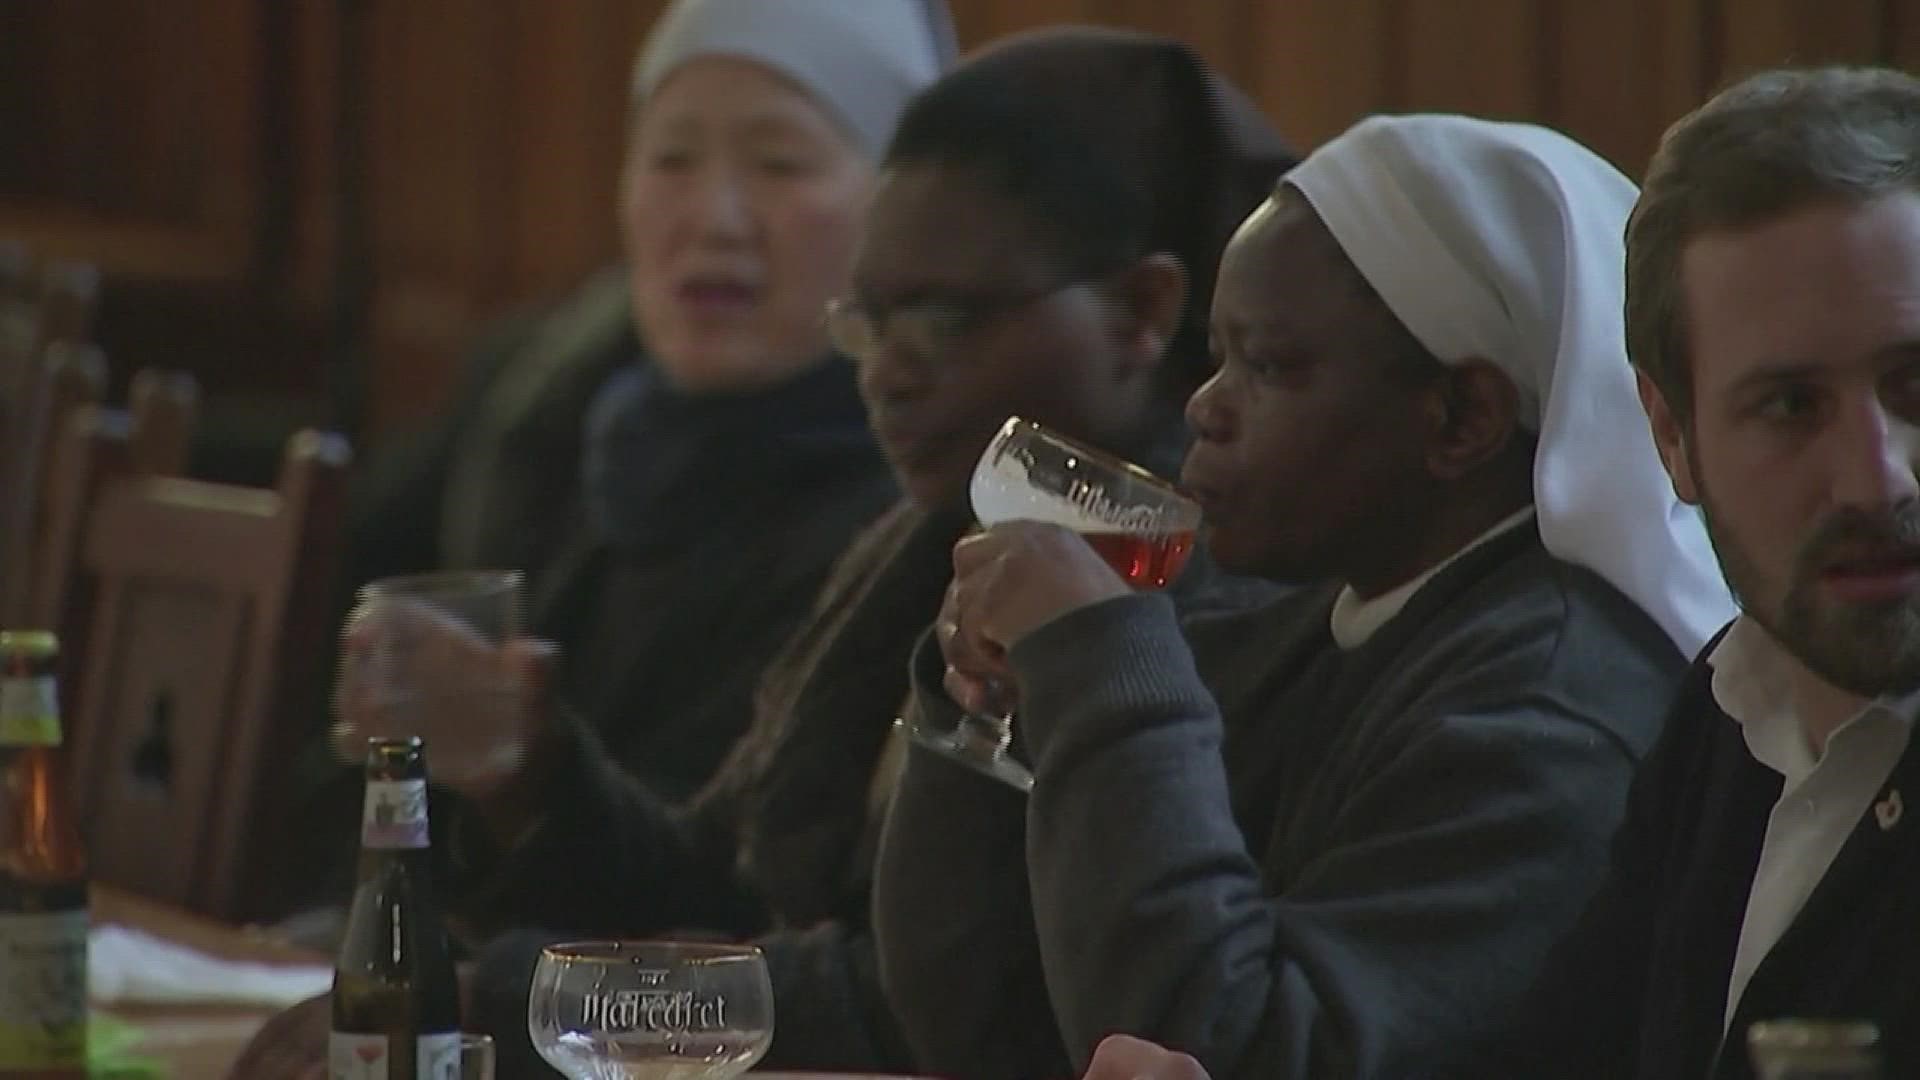 The nuns provide ingredients to the brewery in exchange for funds to renovate their facilities.